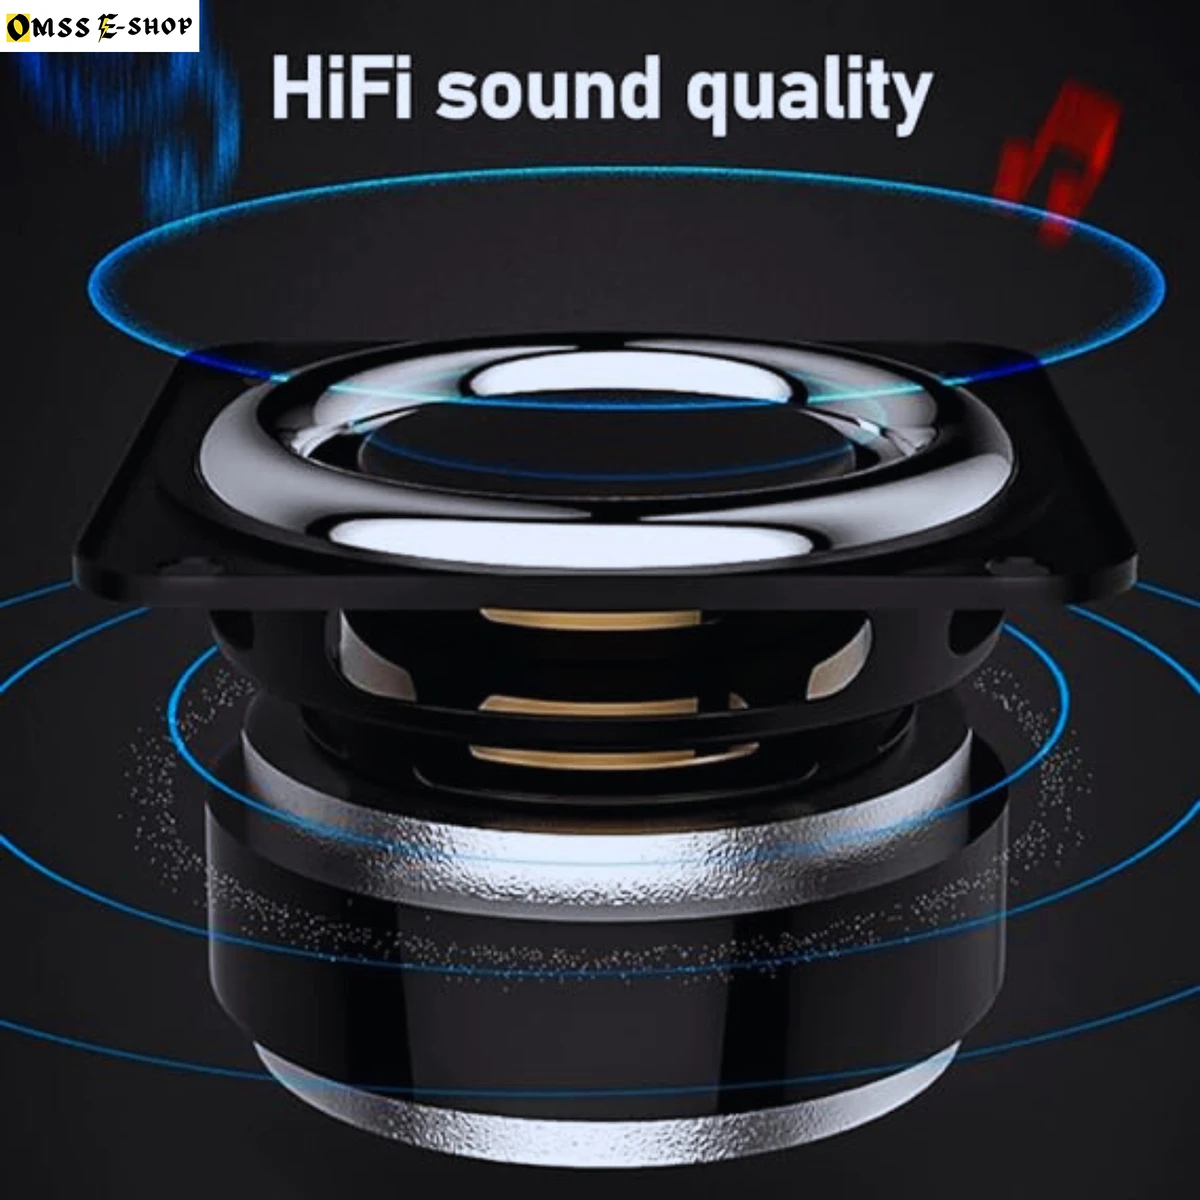 E-3052 Bluetooth Speaker Surround Sound Portable Outdoor HiFi Stereo Mini Wireless Subwoofer for Mobile Phone With RGB LED Lamp